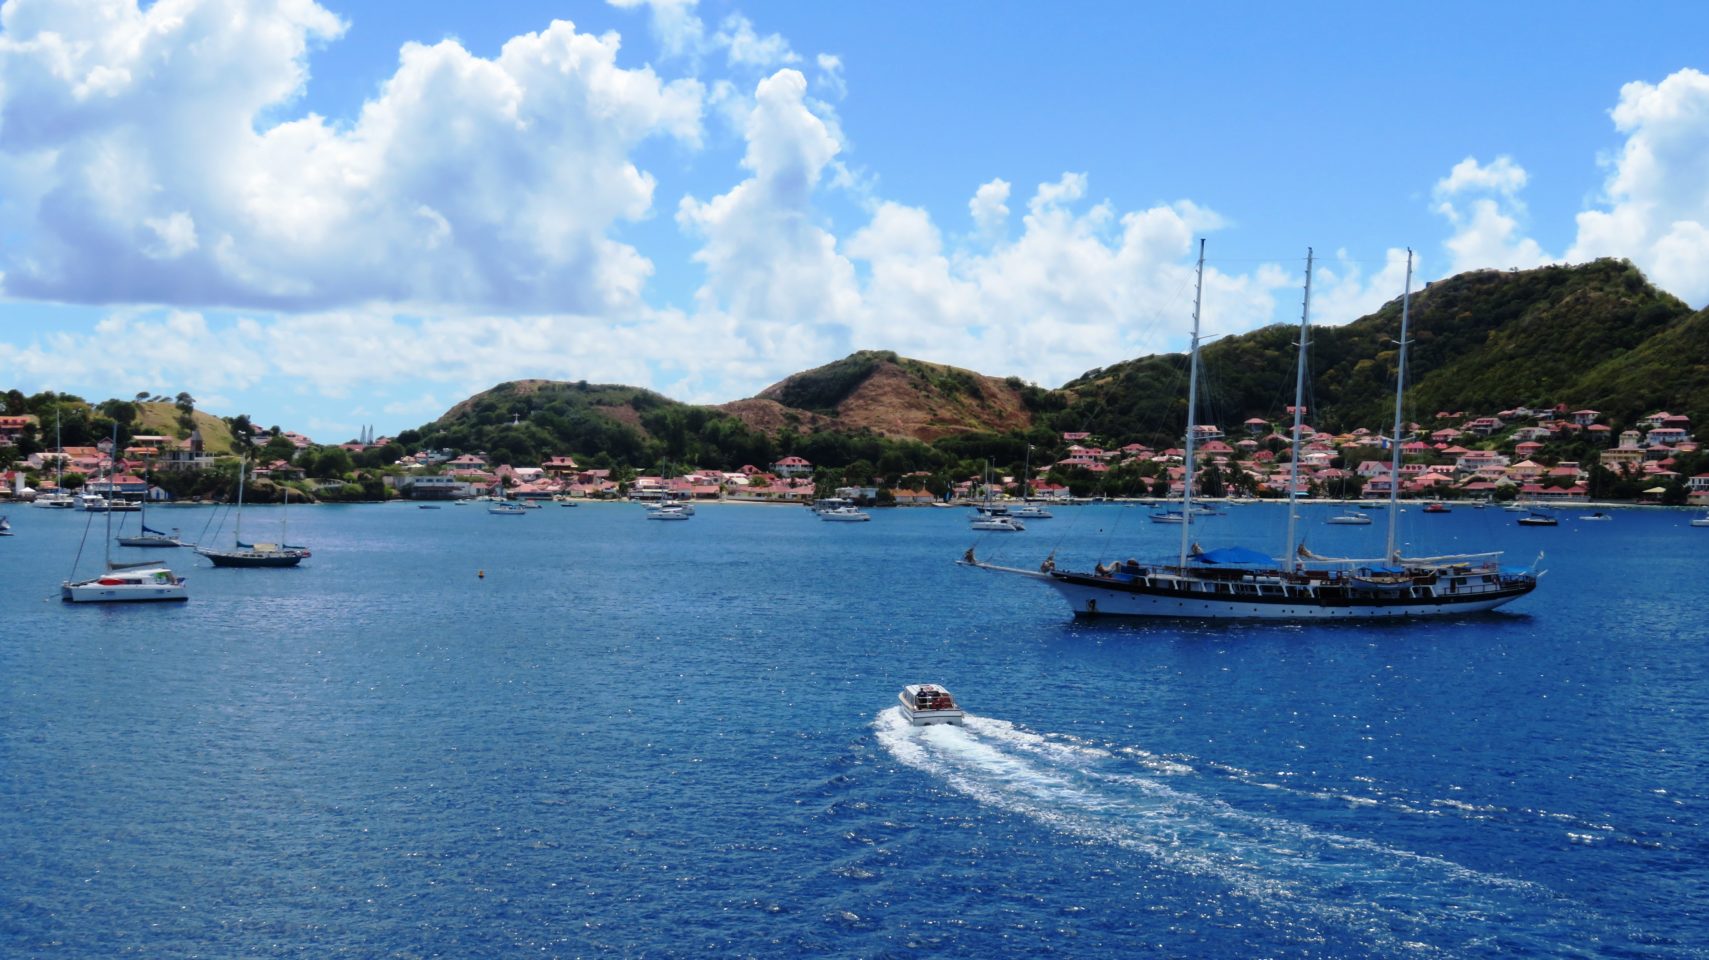 Windstar Cruises ~ a glorious view from our French balcony overlooking the renowned Baie des Saintes in Guadeloupe, French West Indies